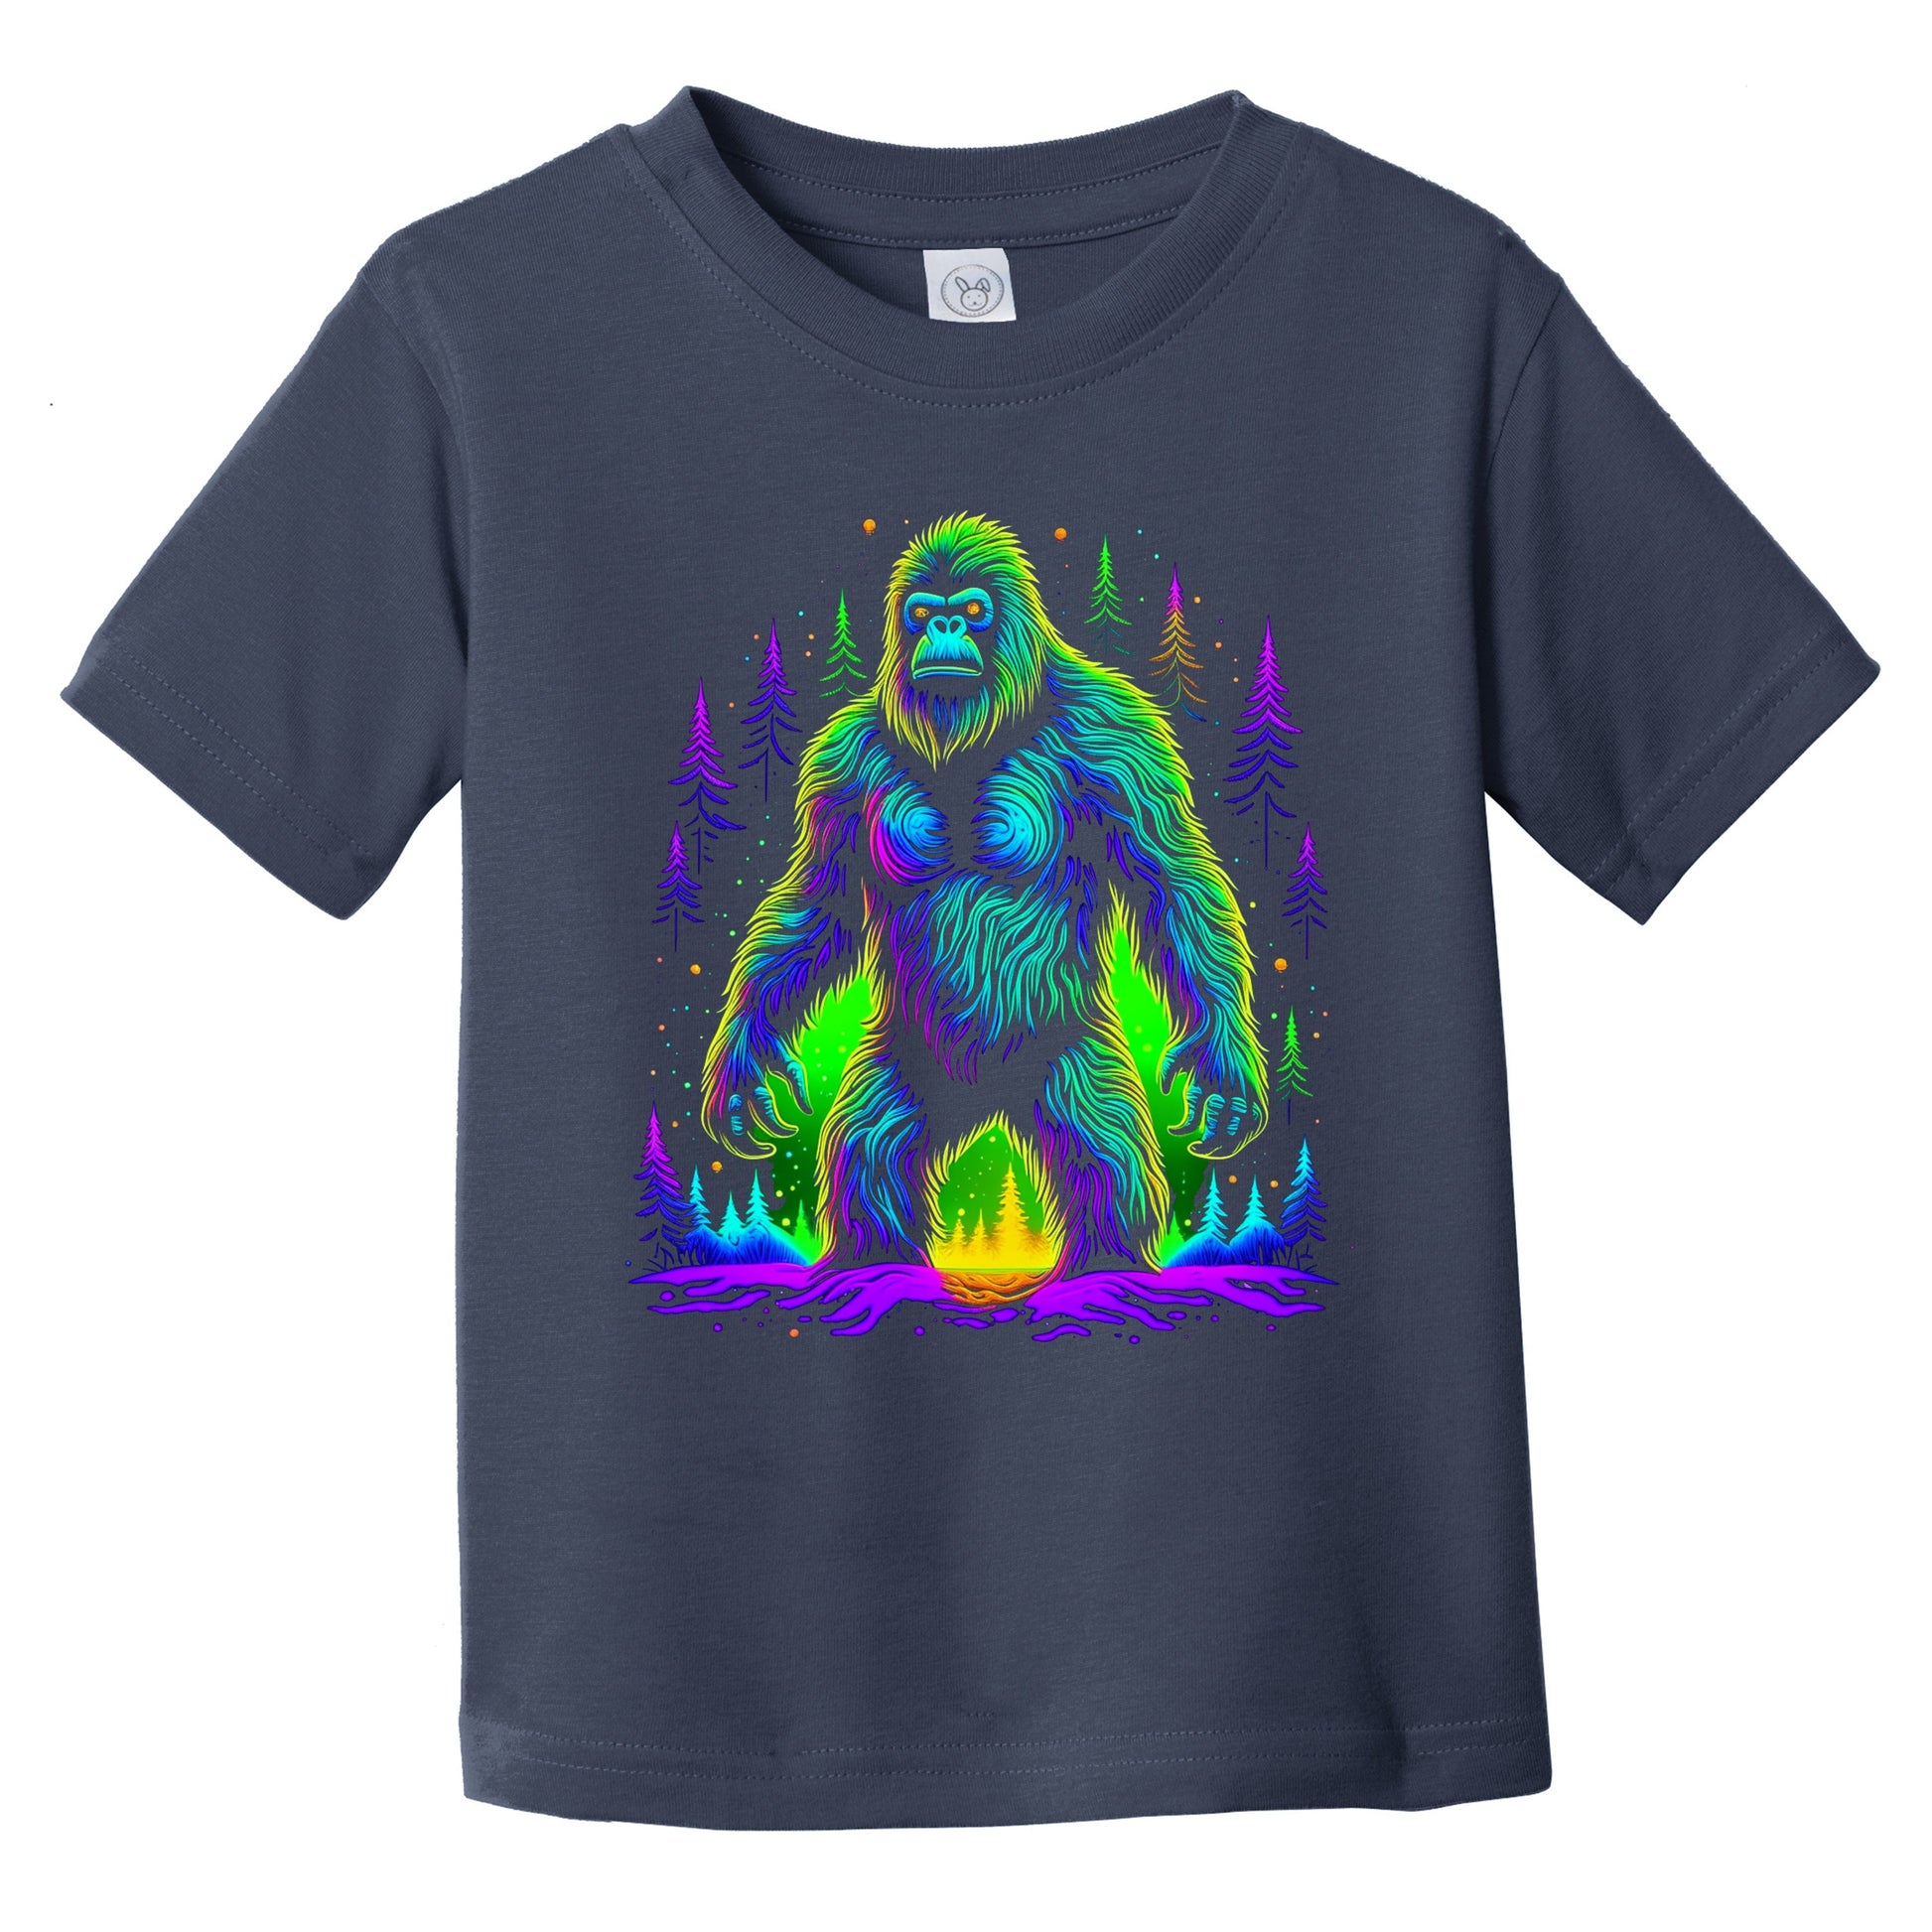 Colorful Bright Bigfoot Vibrant Psychedelic Sasquatch Art Infant Toddler T-Shirt